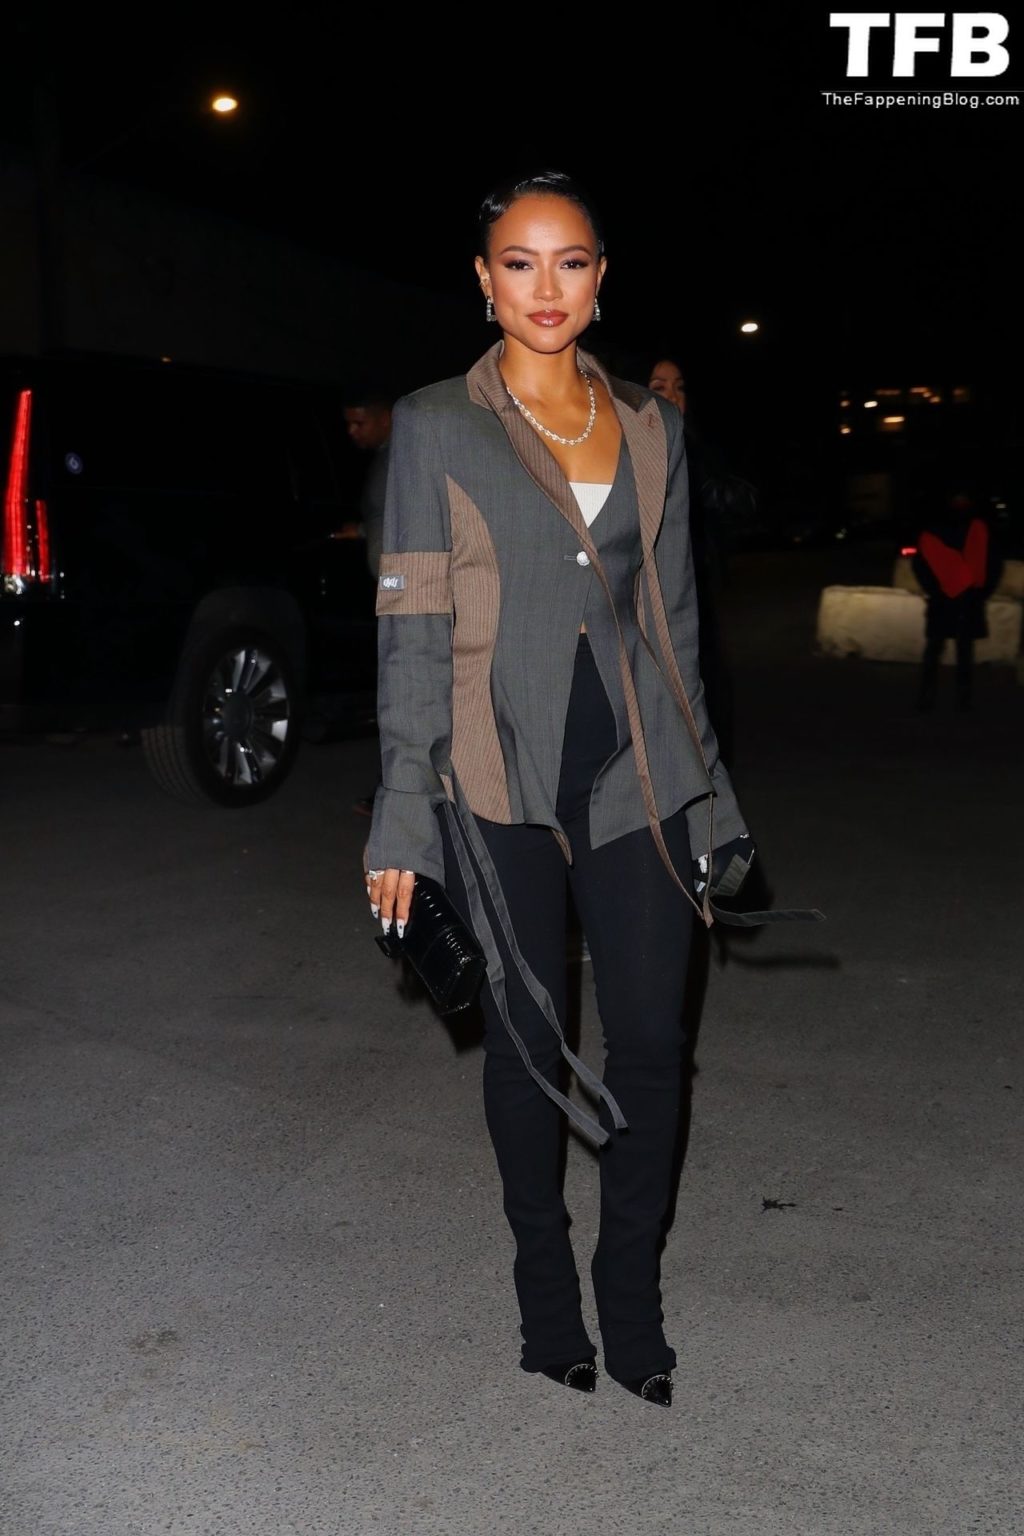 Karrueche Tran Sexy The Fappening Blog 26 1024x1536 - Karrueche Tran Shows Off Her Toned Abs in NYC (26 Photos)